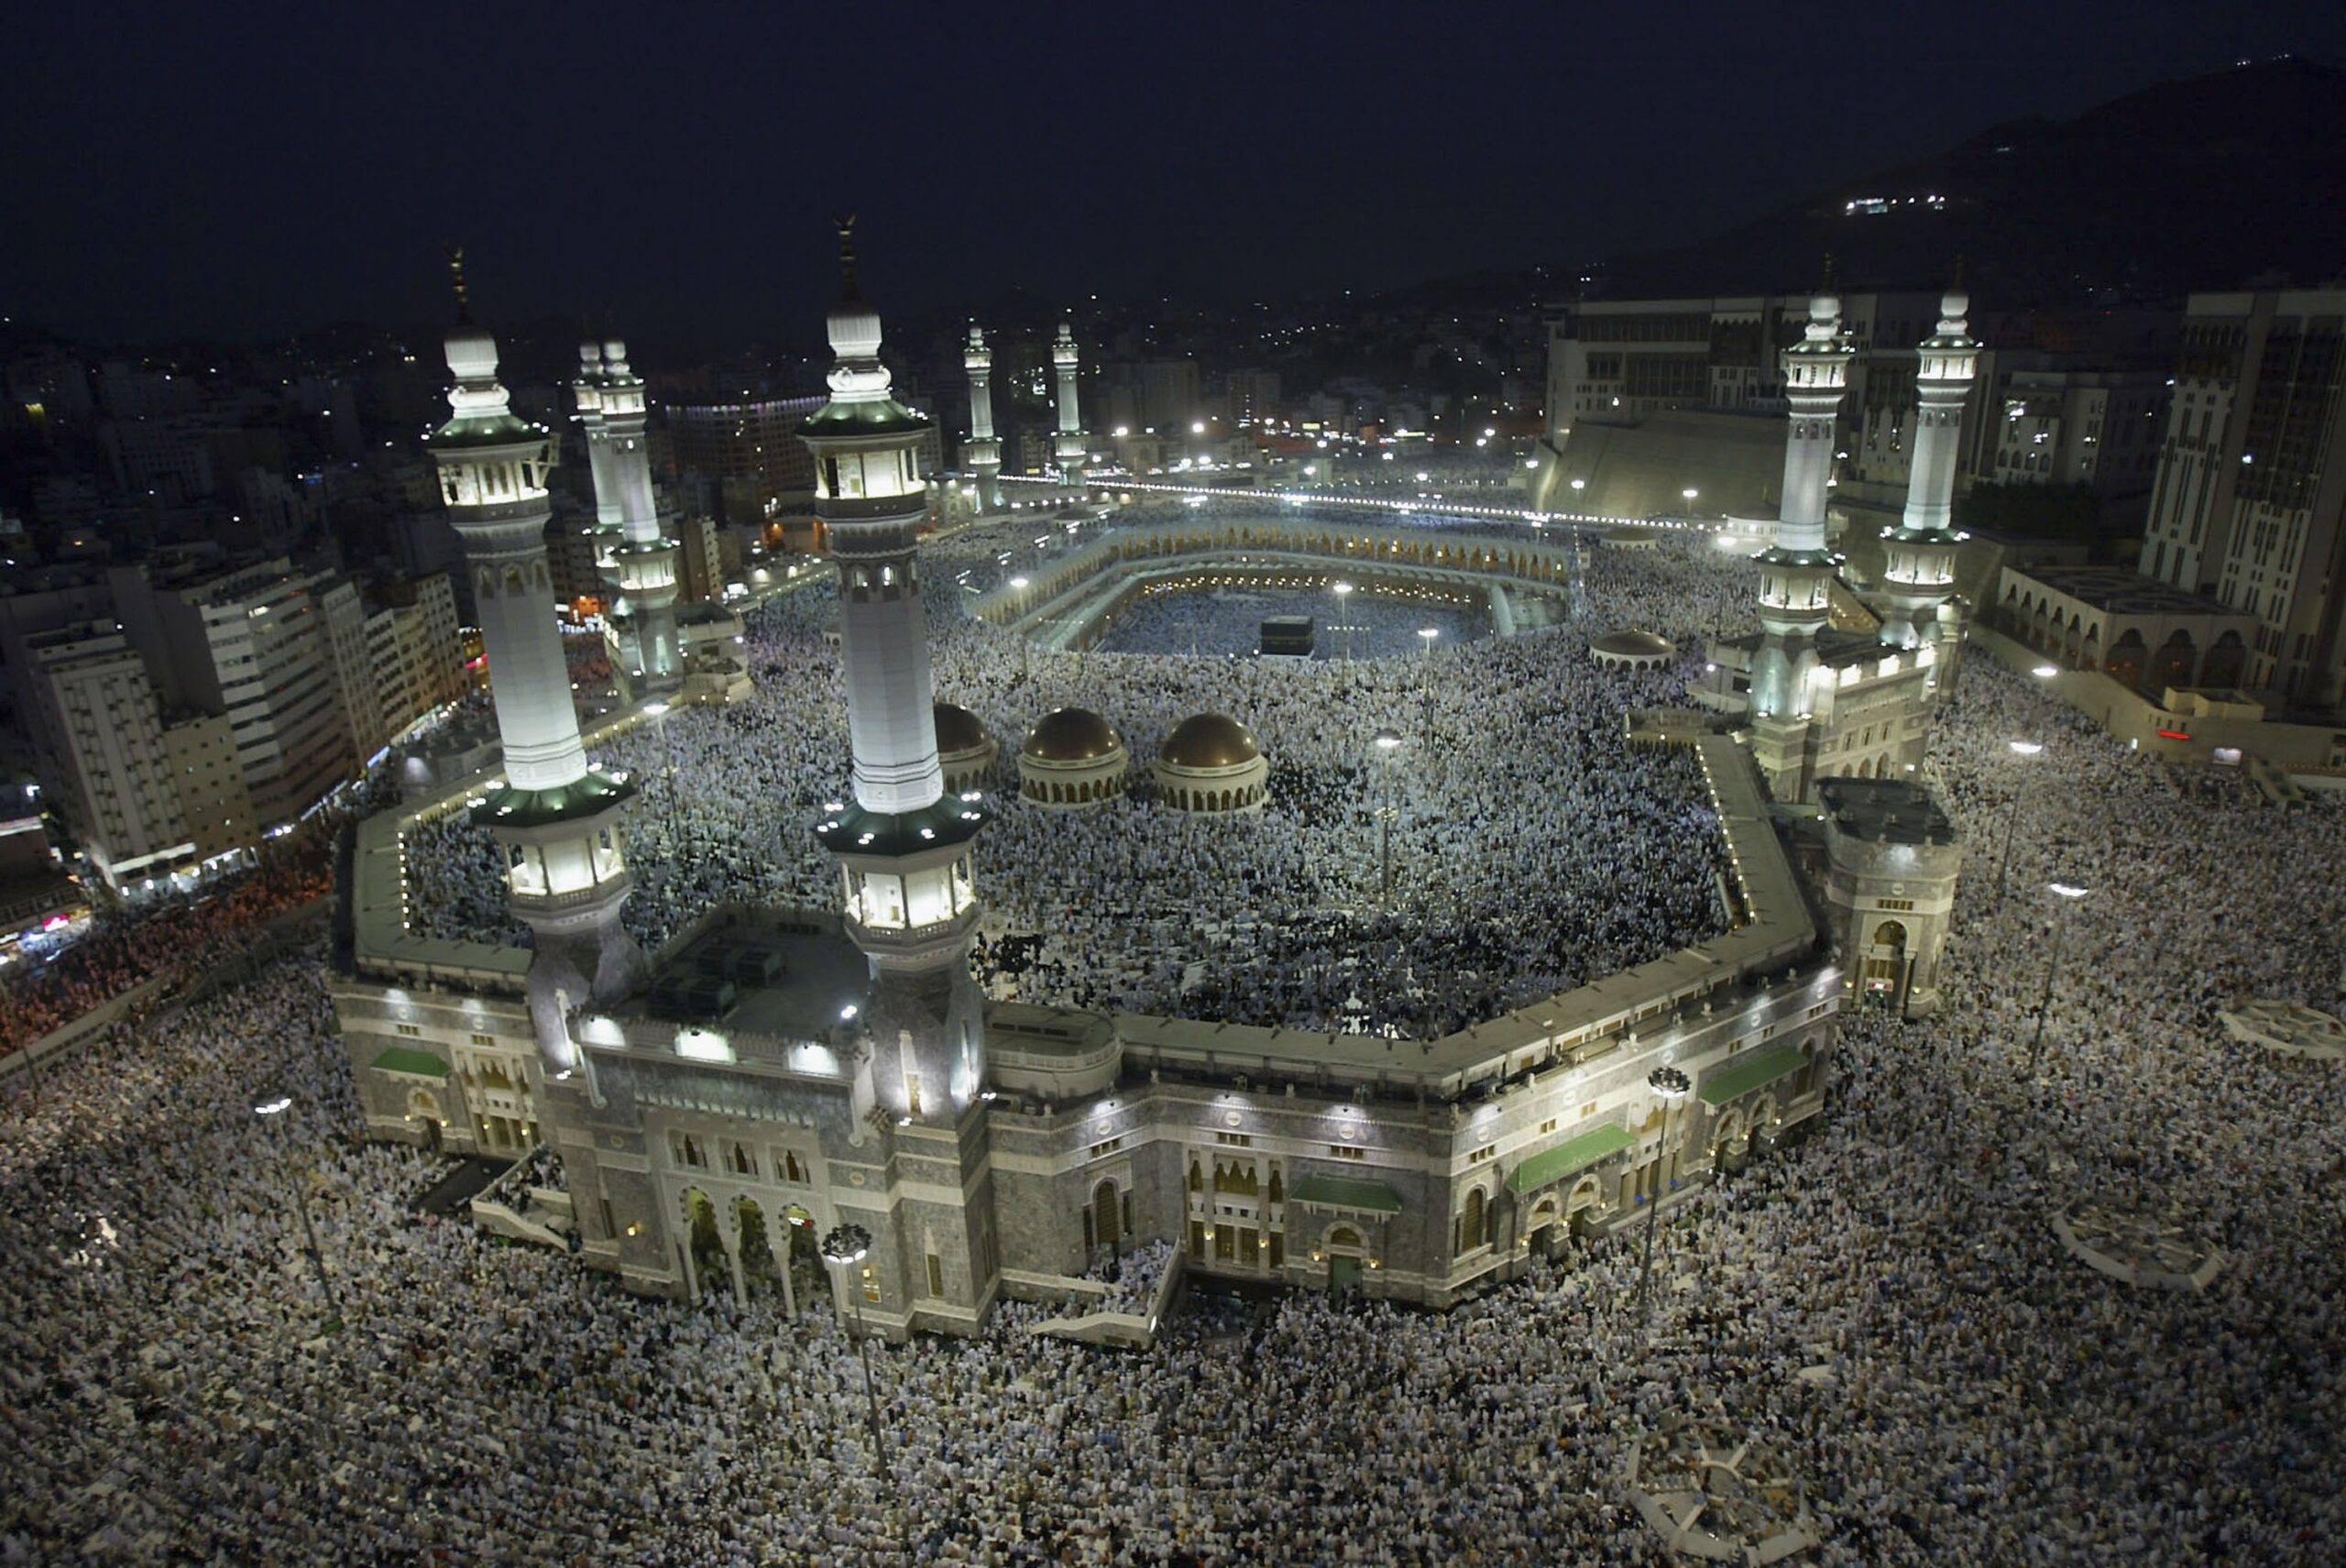 Most Expensive Buildings in the World- The Great Mosque of Mecca or Masjid al-Haram